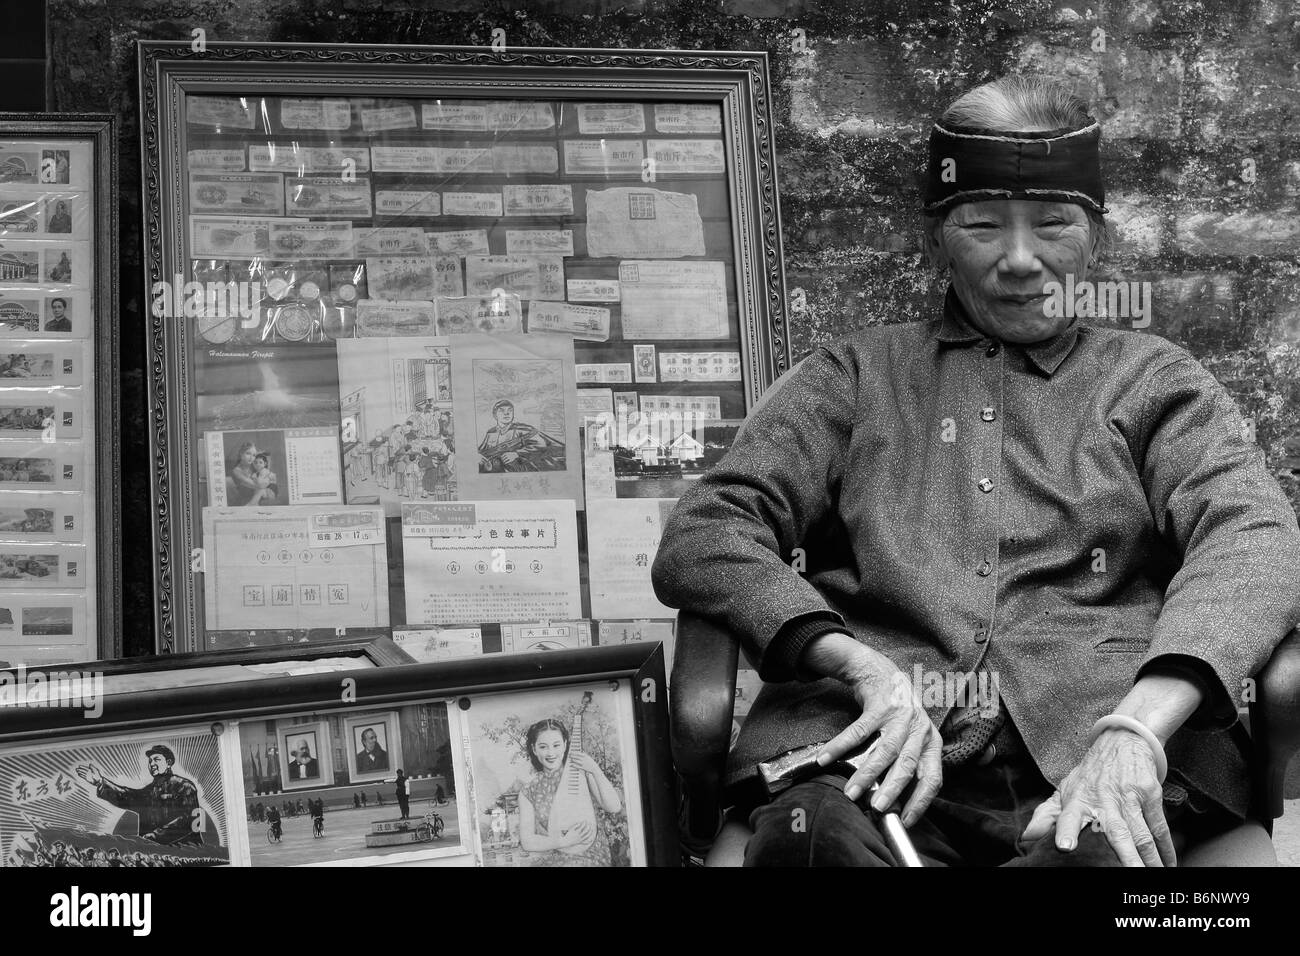 A very nice beautiful and elegant Chinese lady at 93 years old sits in front of her book store in Guangzhou with Mao propaganda. Stock Photo